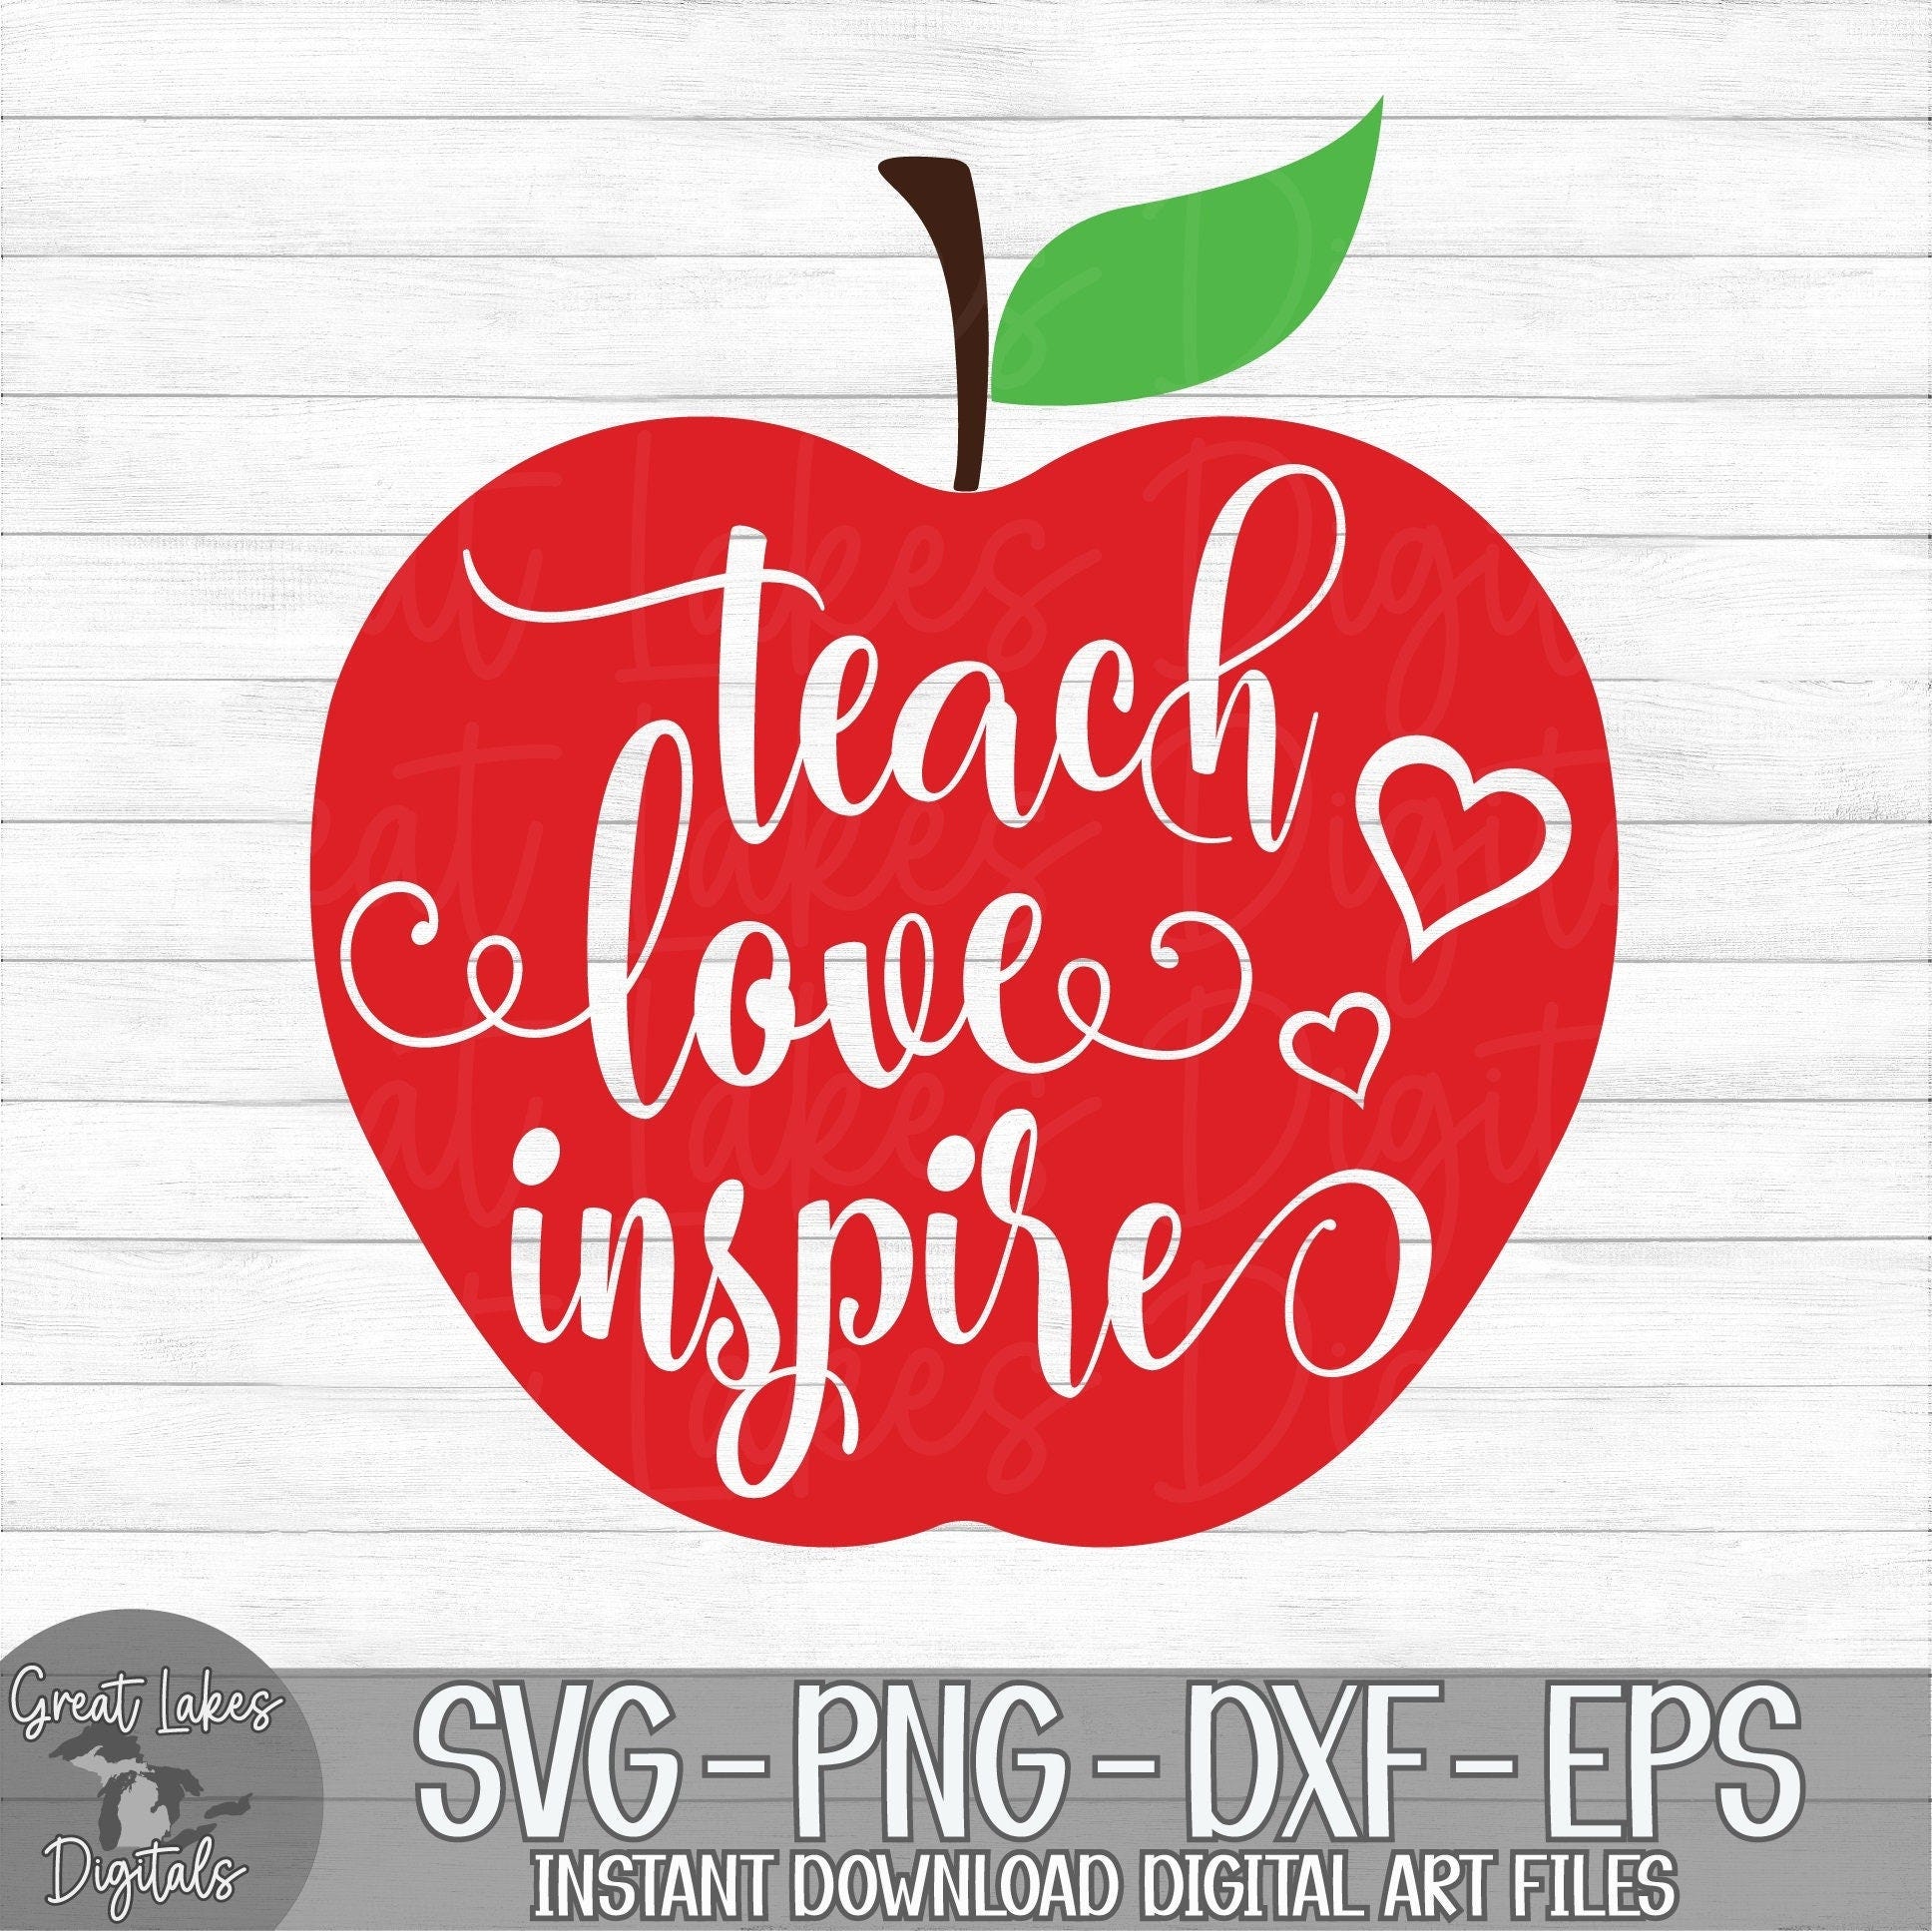 Teach Love Inspire - Instant Digital Download - svg, png, dxf, and eps files included! Back To School, Teacher, Apple